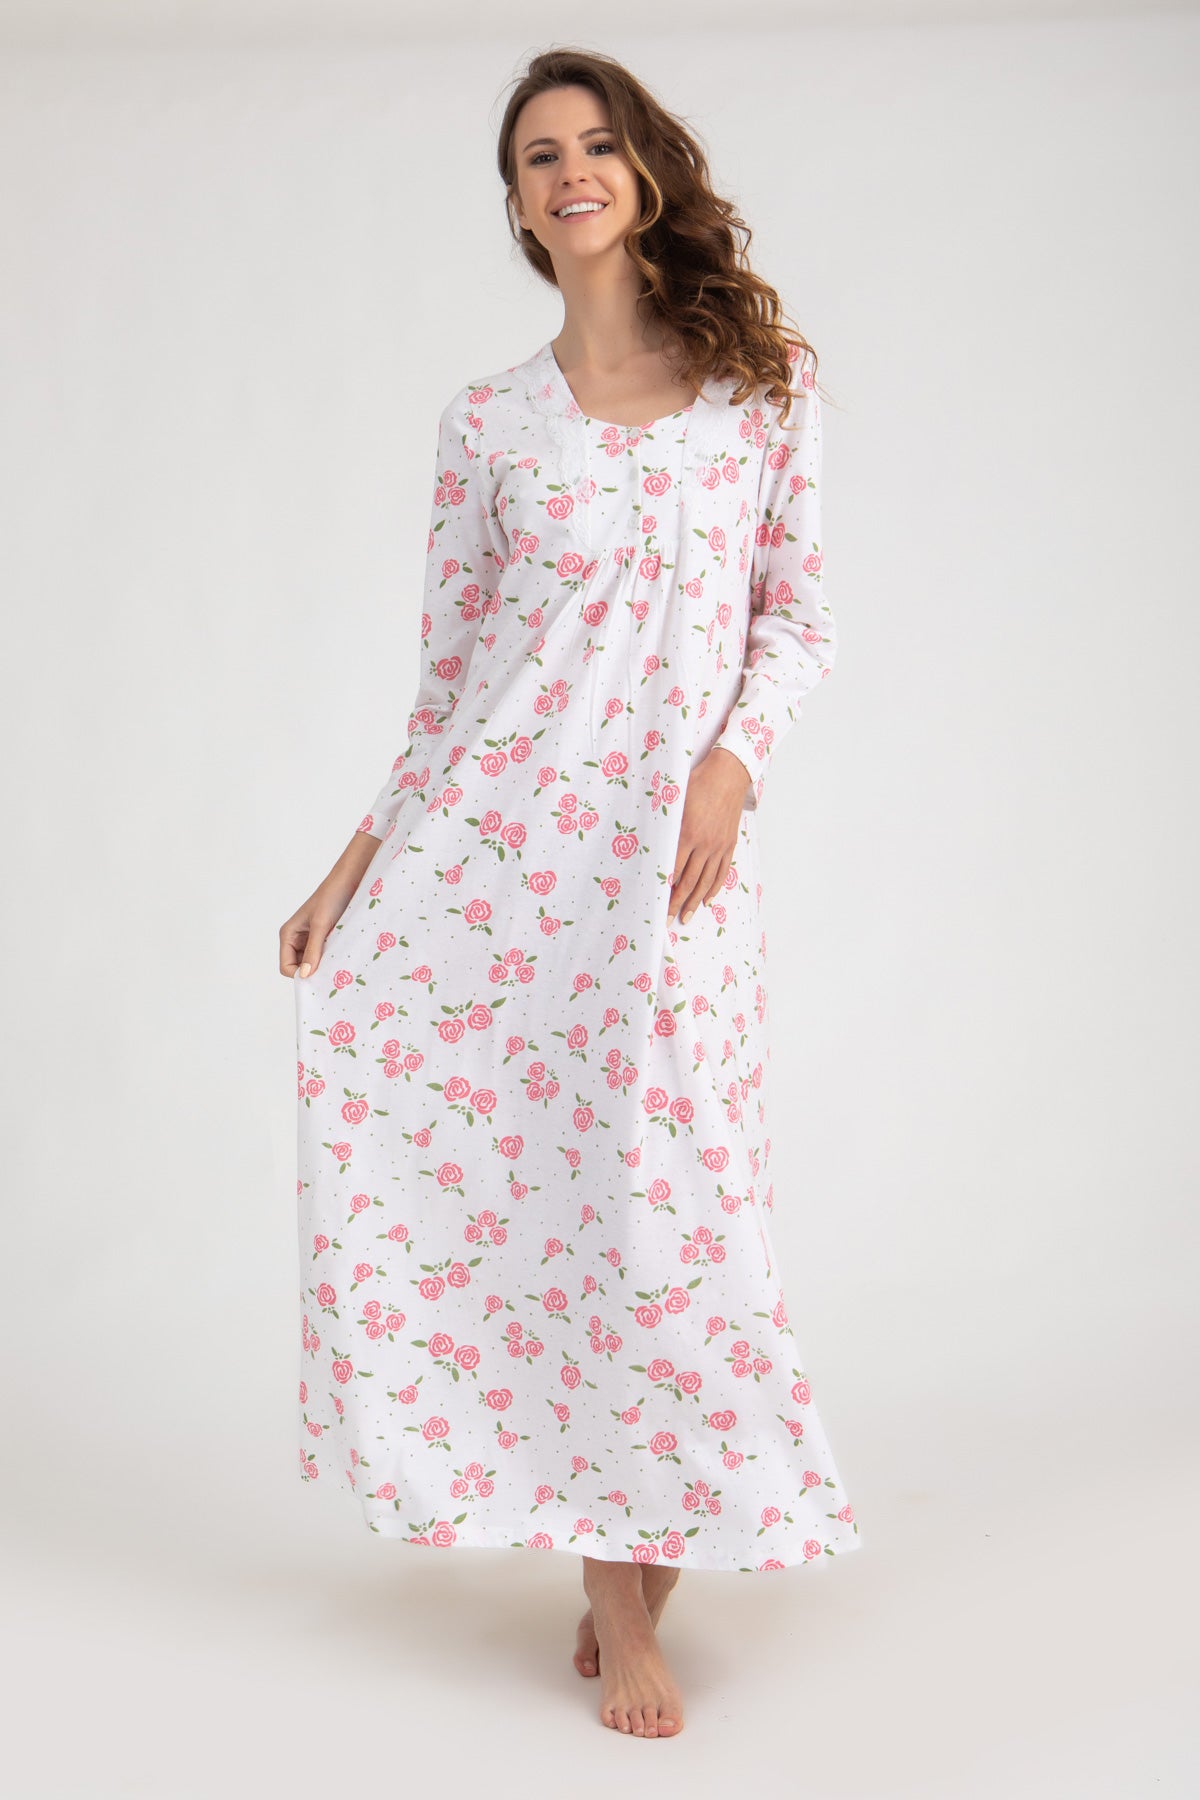 Roses Print Long Sleeve Nightgown With Lace detail